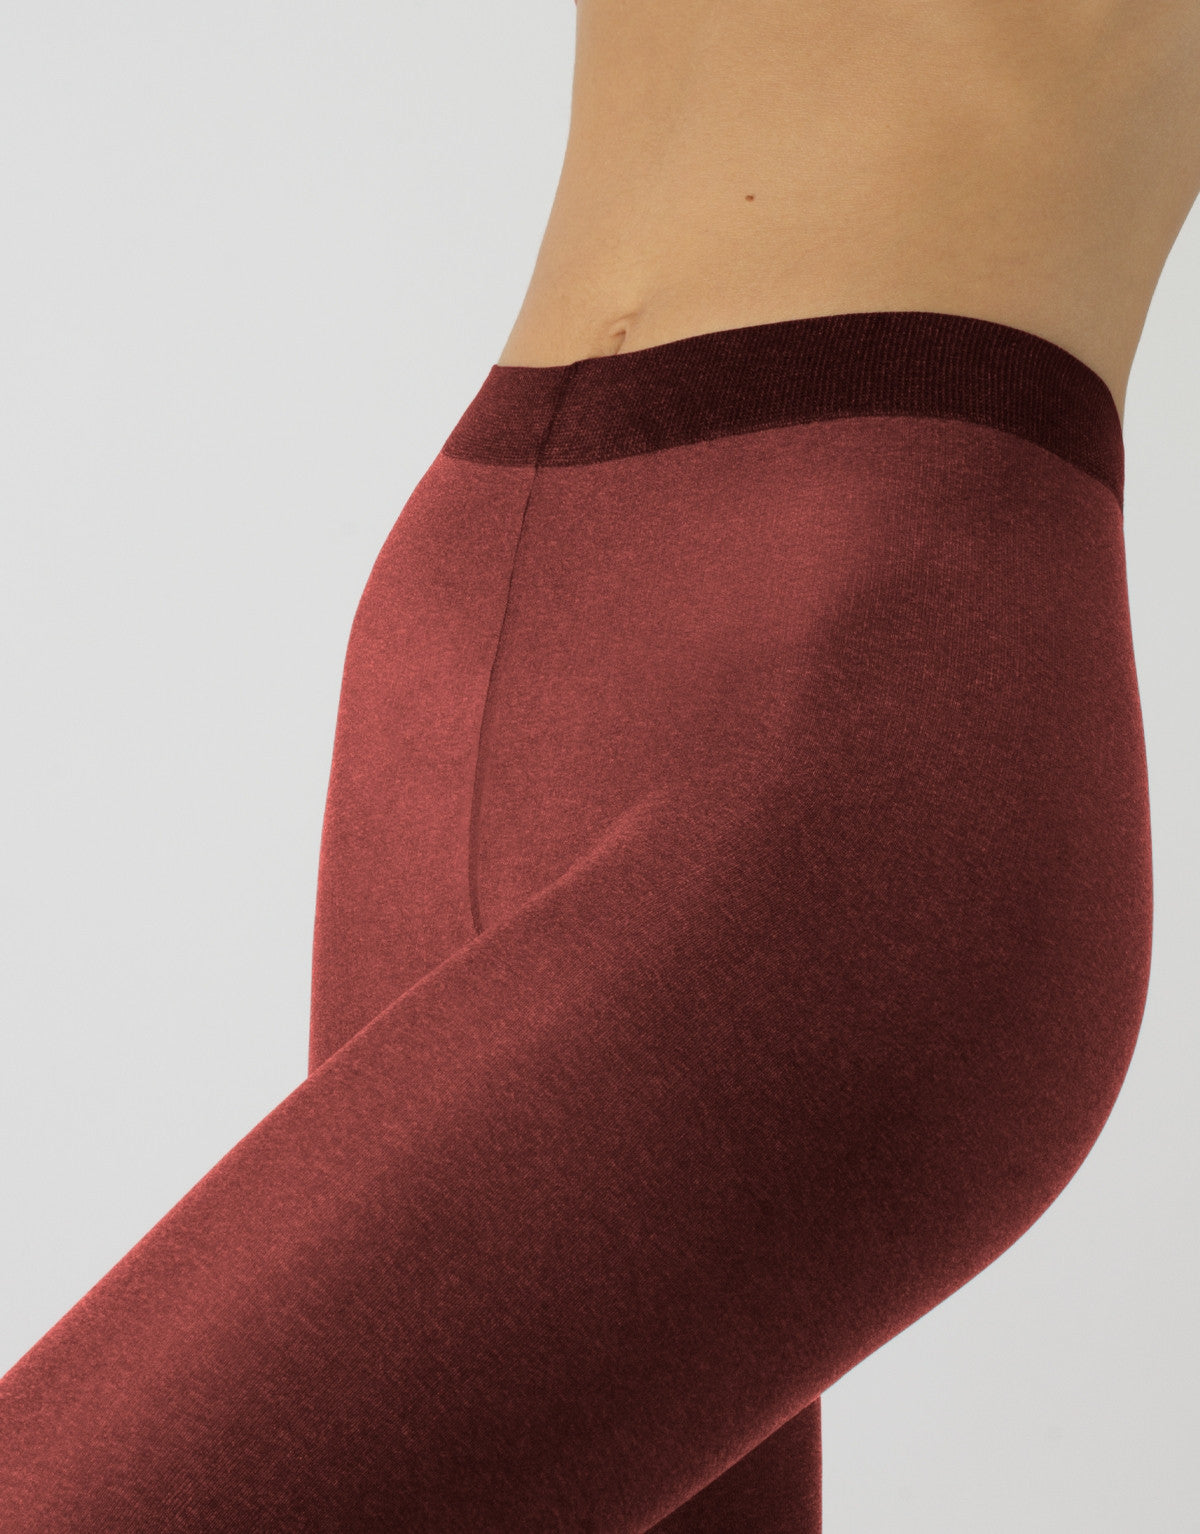 Calzitaly Melange Seam Tights - Wine burgundy opaque fashion tights with a knitted fleck effect, white back seam.